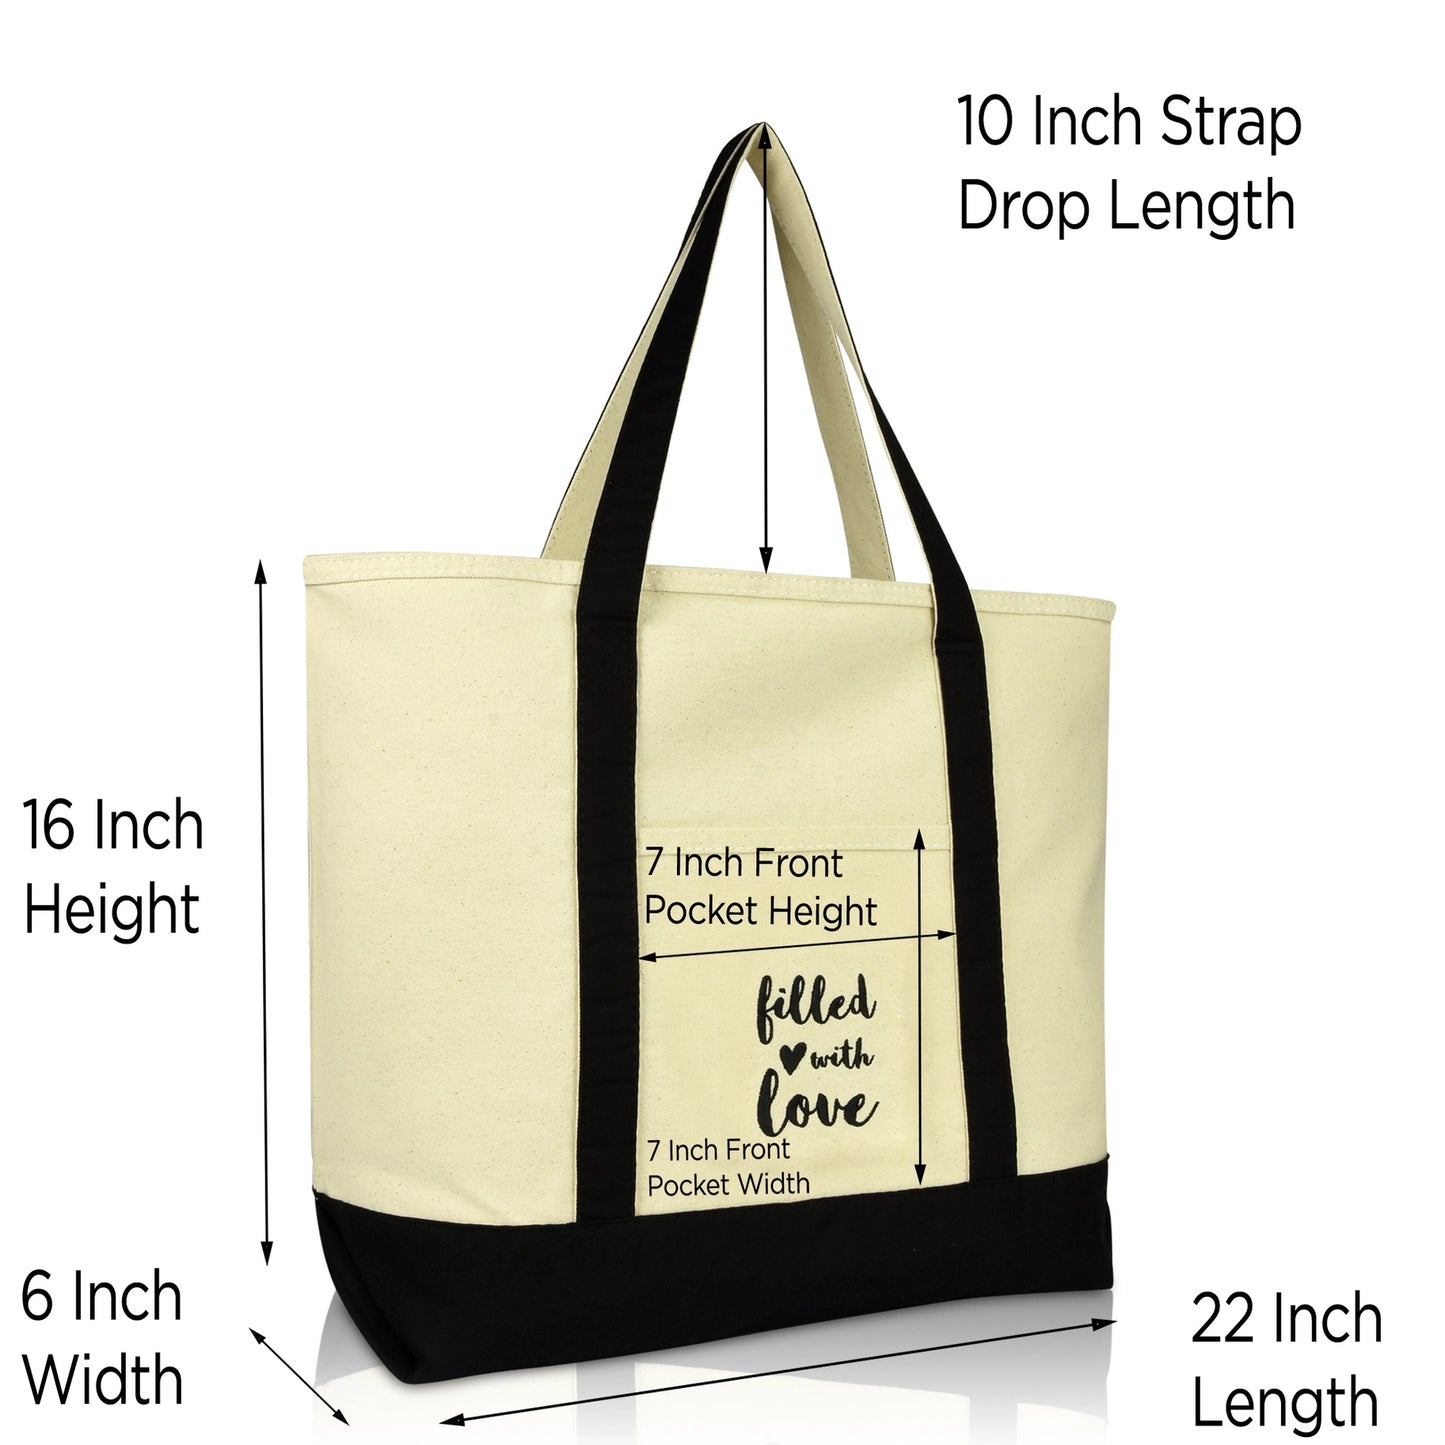 DALIX Filled With Love Cute Cotton Tote Bag